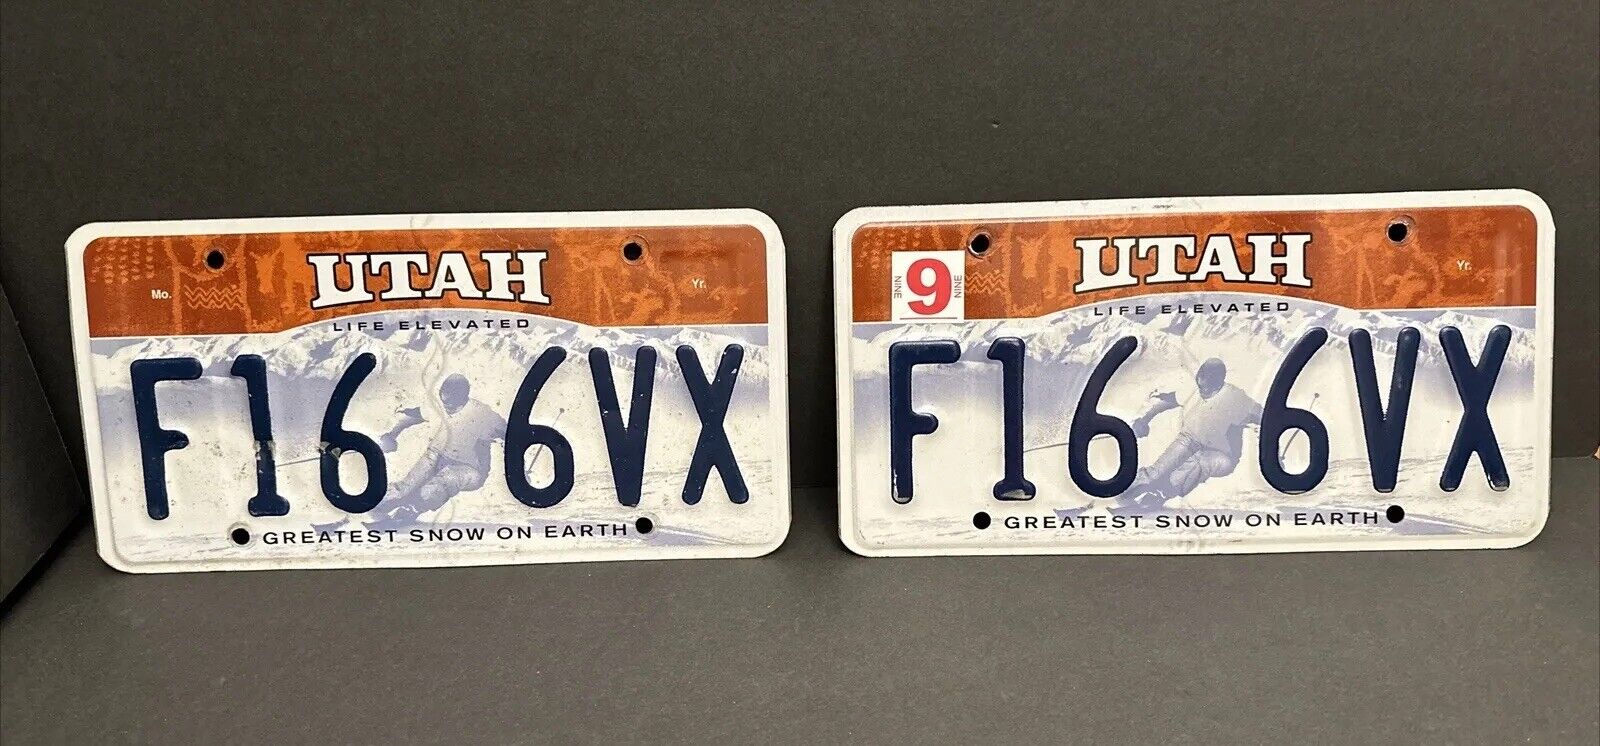 Utah License Plate - F16 6VX w/Sticker, Life Elevated - Greatest Snow on Earth